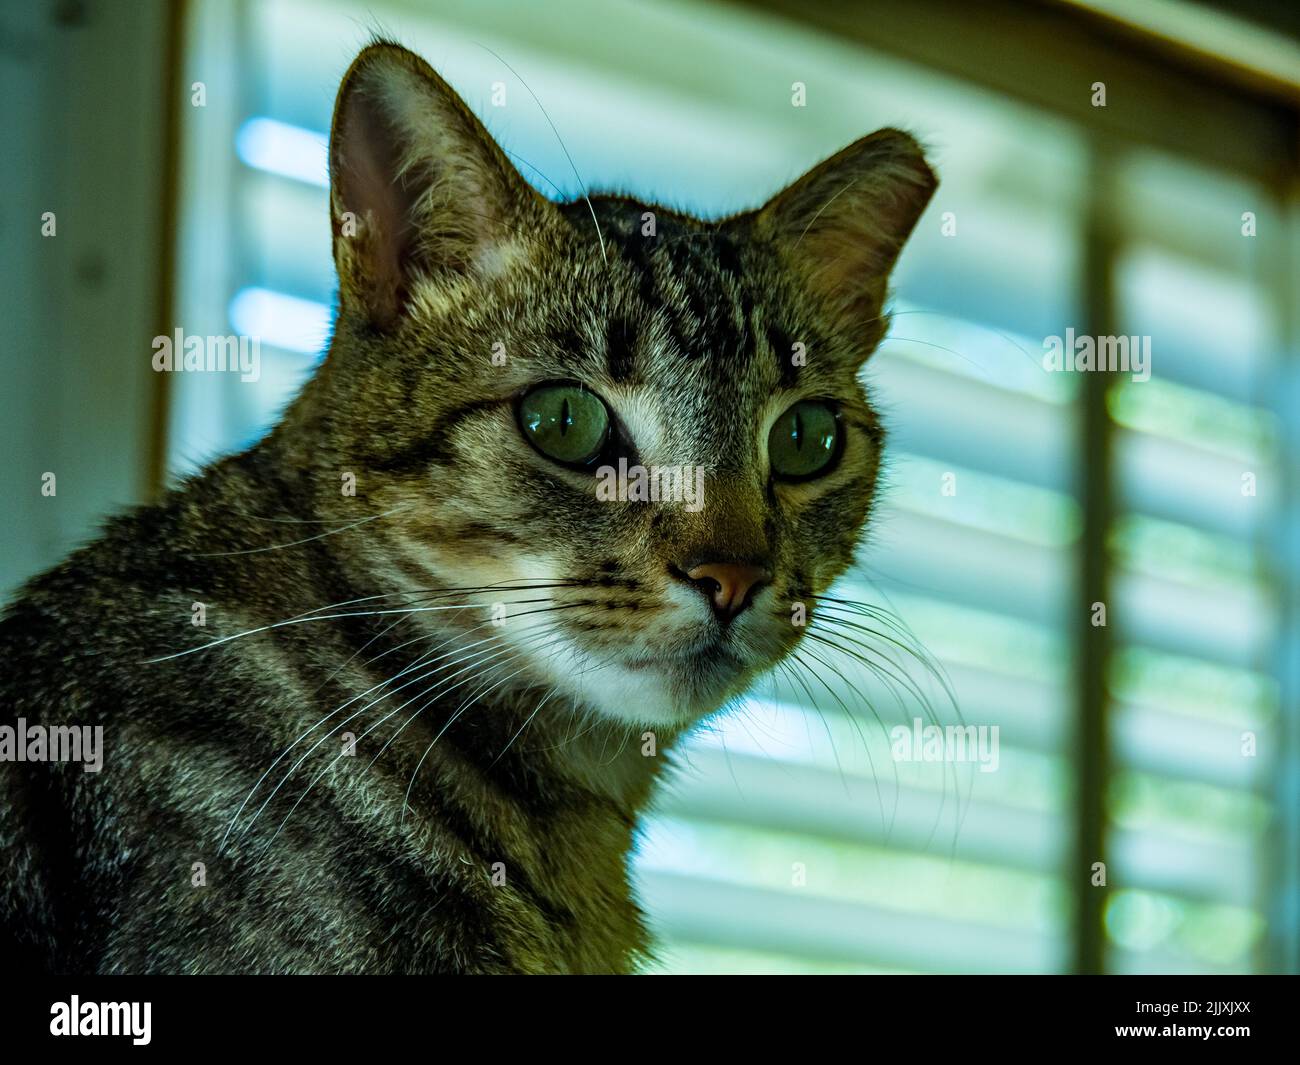 A paranoid looking green eyed cat named George Kittle who started life as a feral cat but has now been tamed. Stock Photo